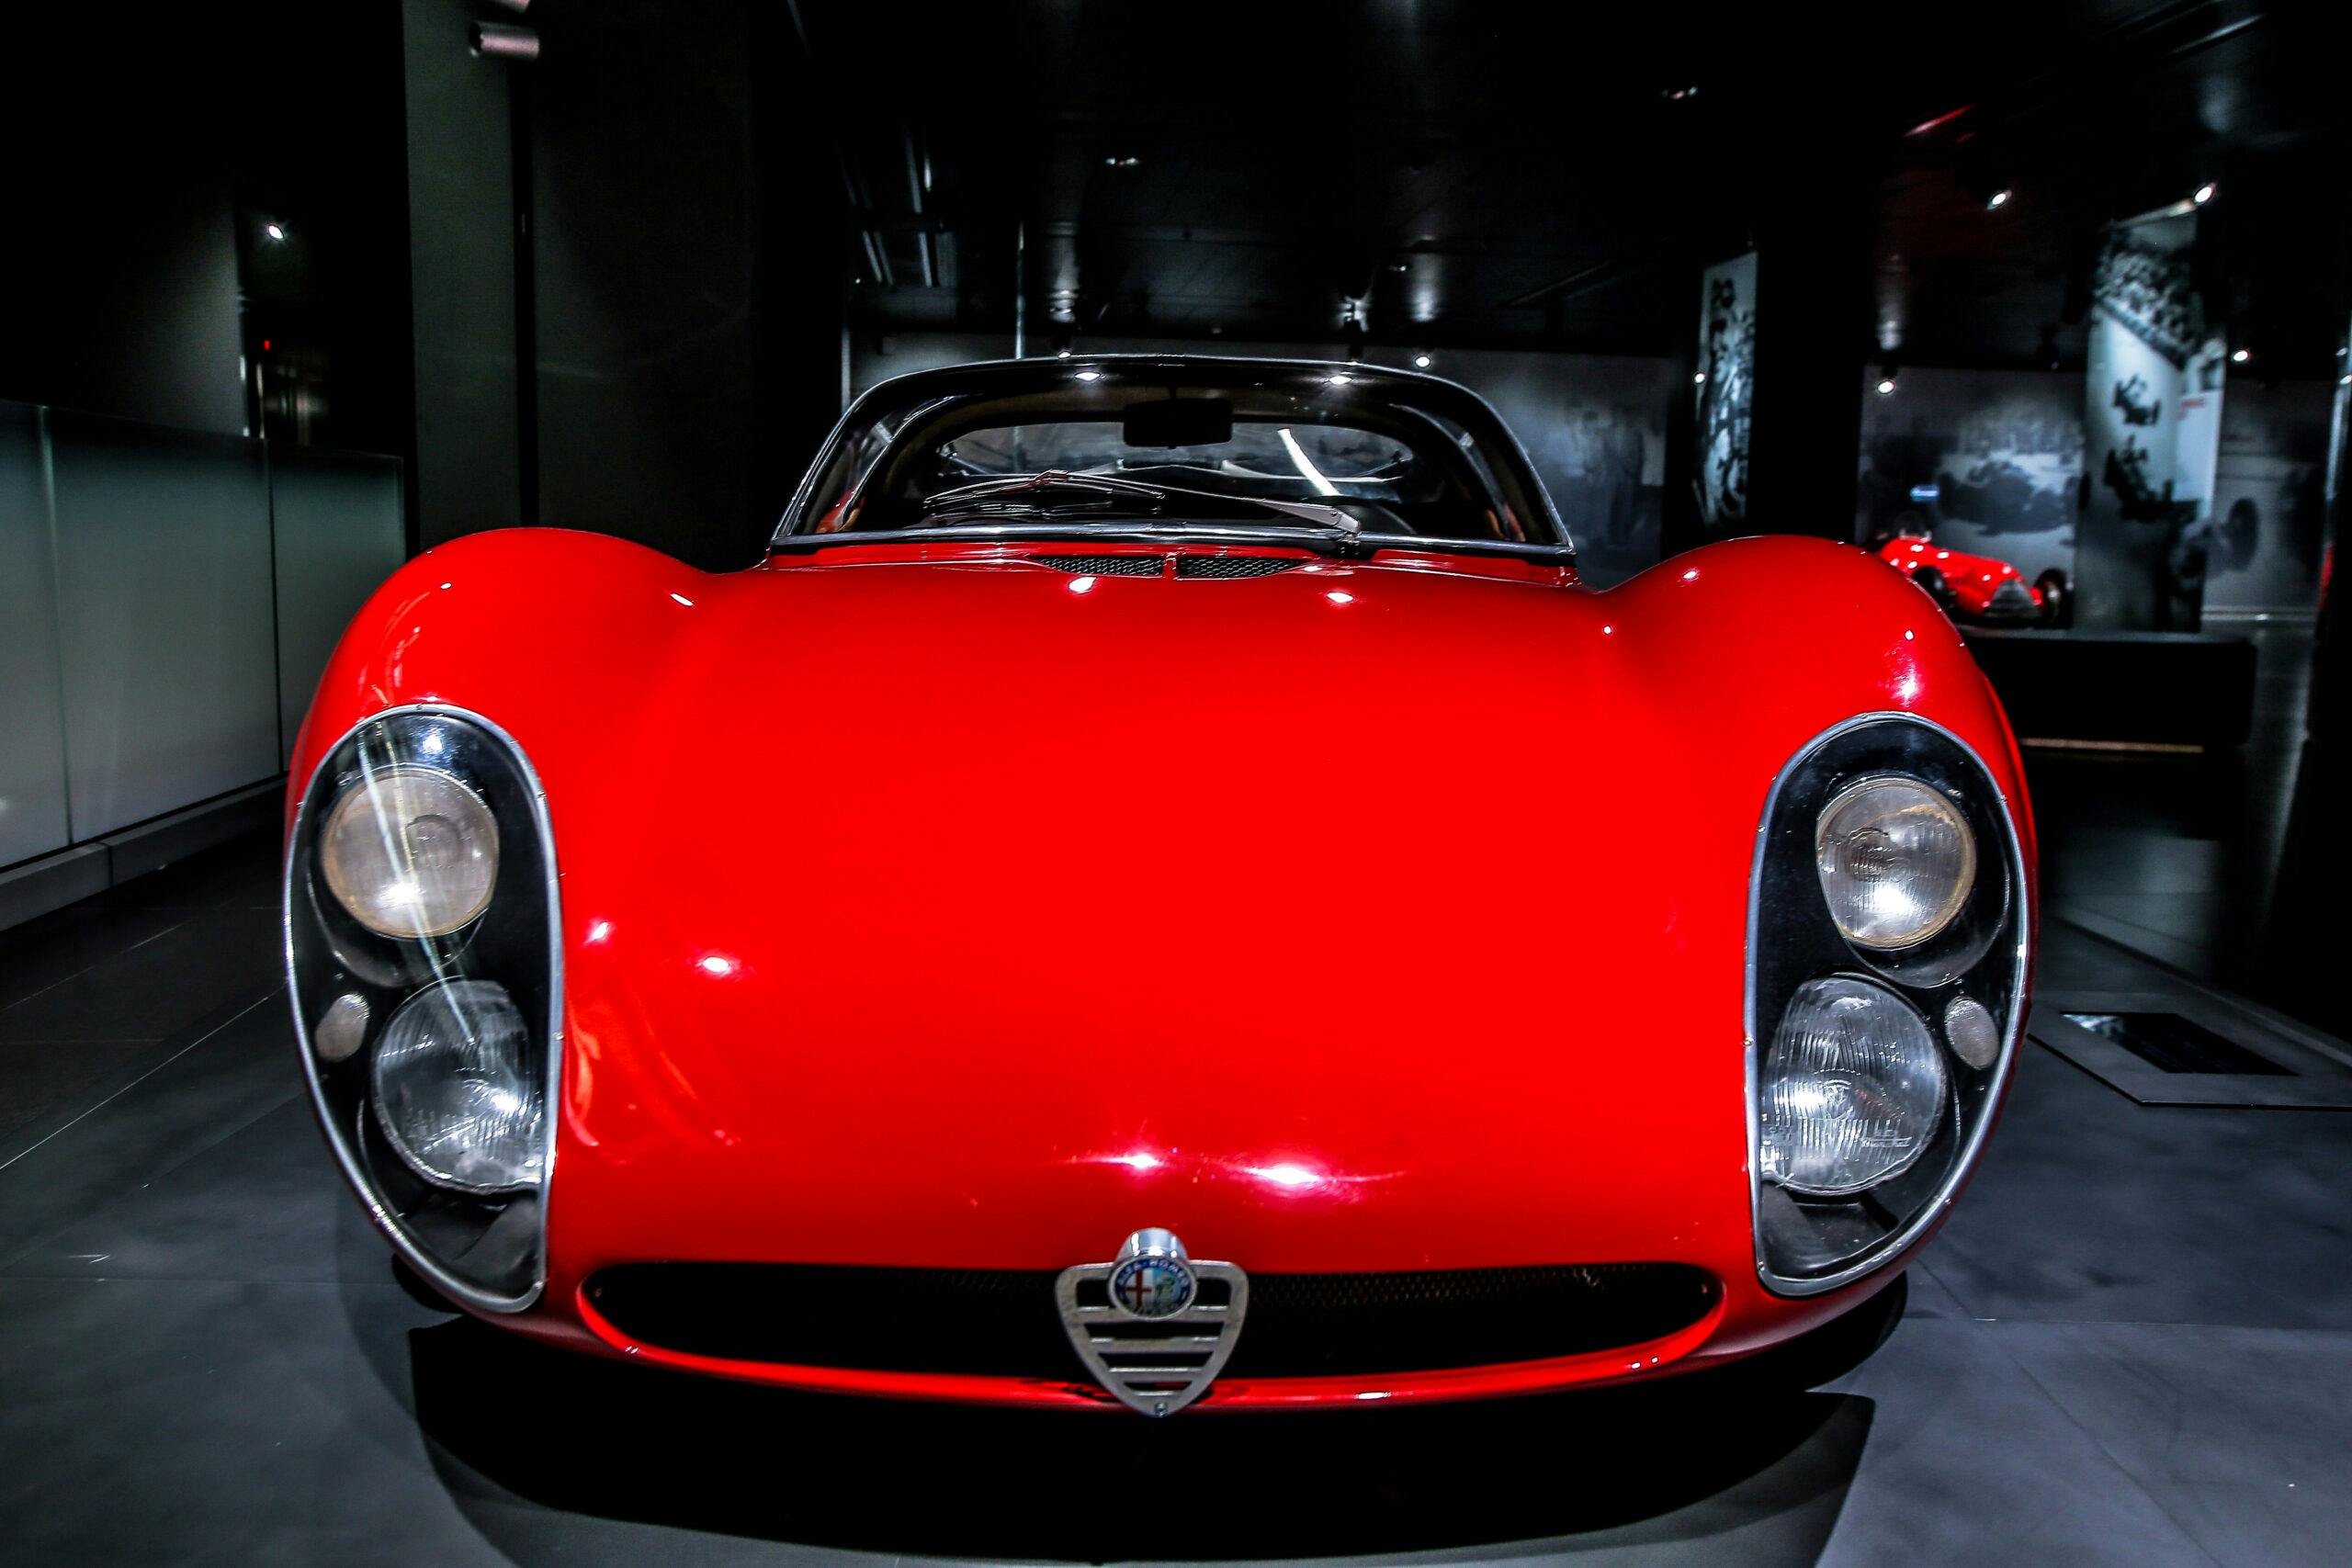 Good grief! The limited-run Alfa Romeo 33 Stradale is utterly gorgeous